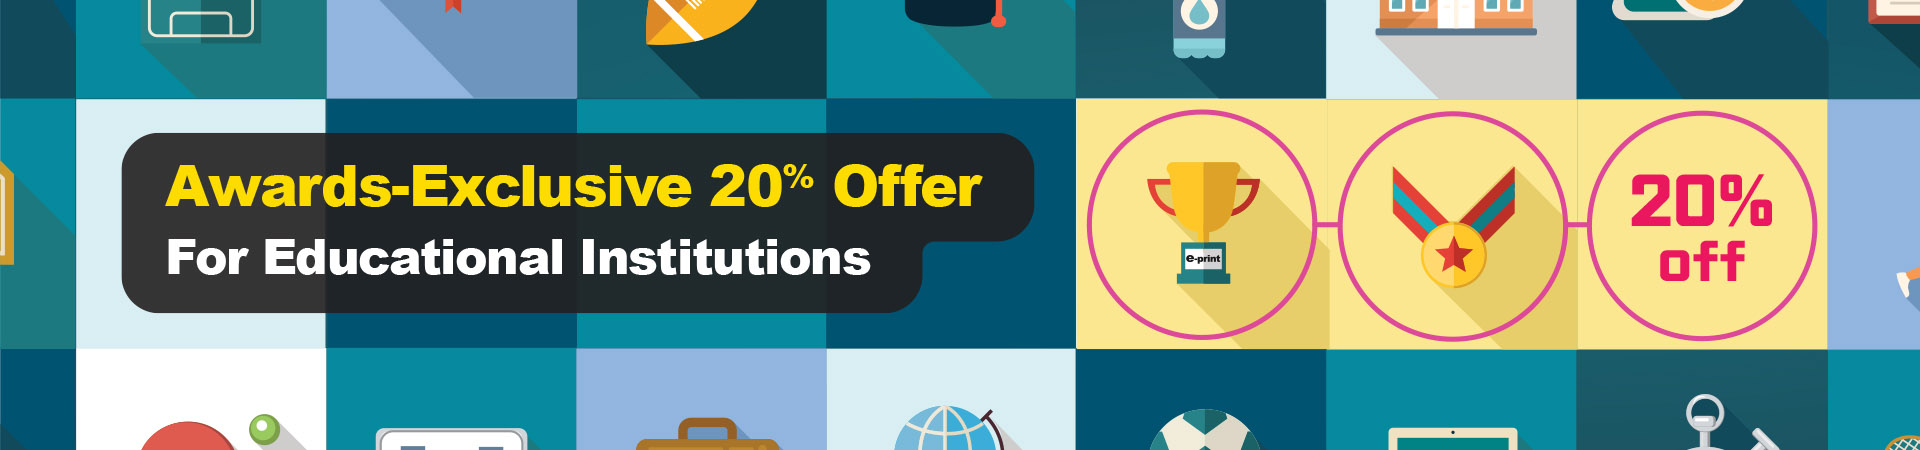 Exclusive 20% offer for educational institutions